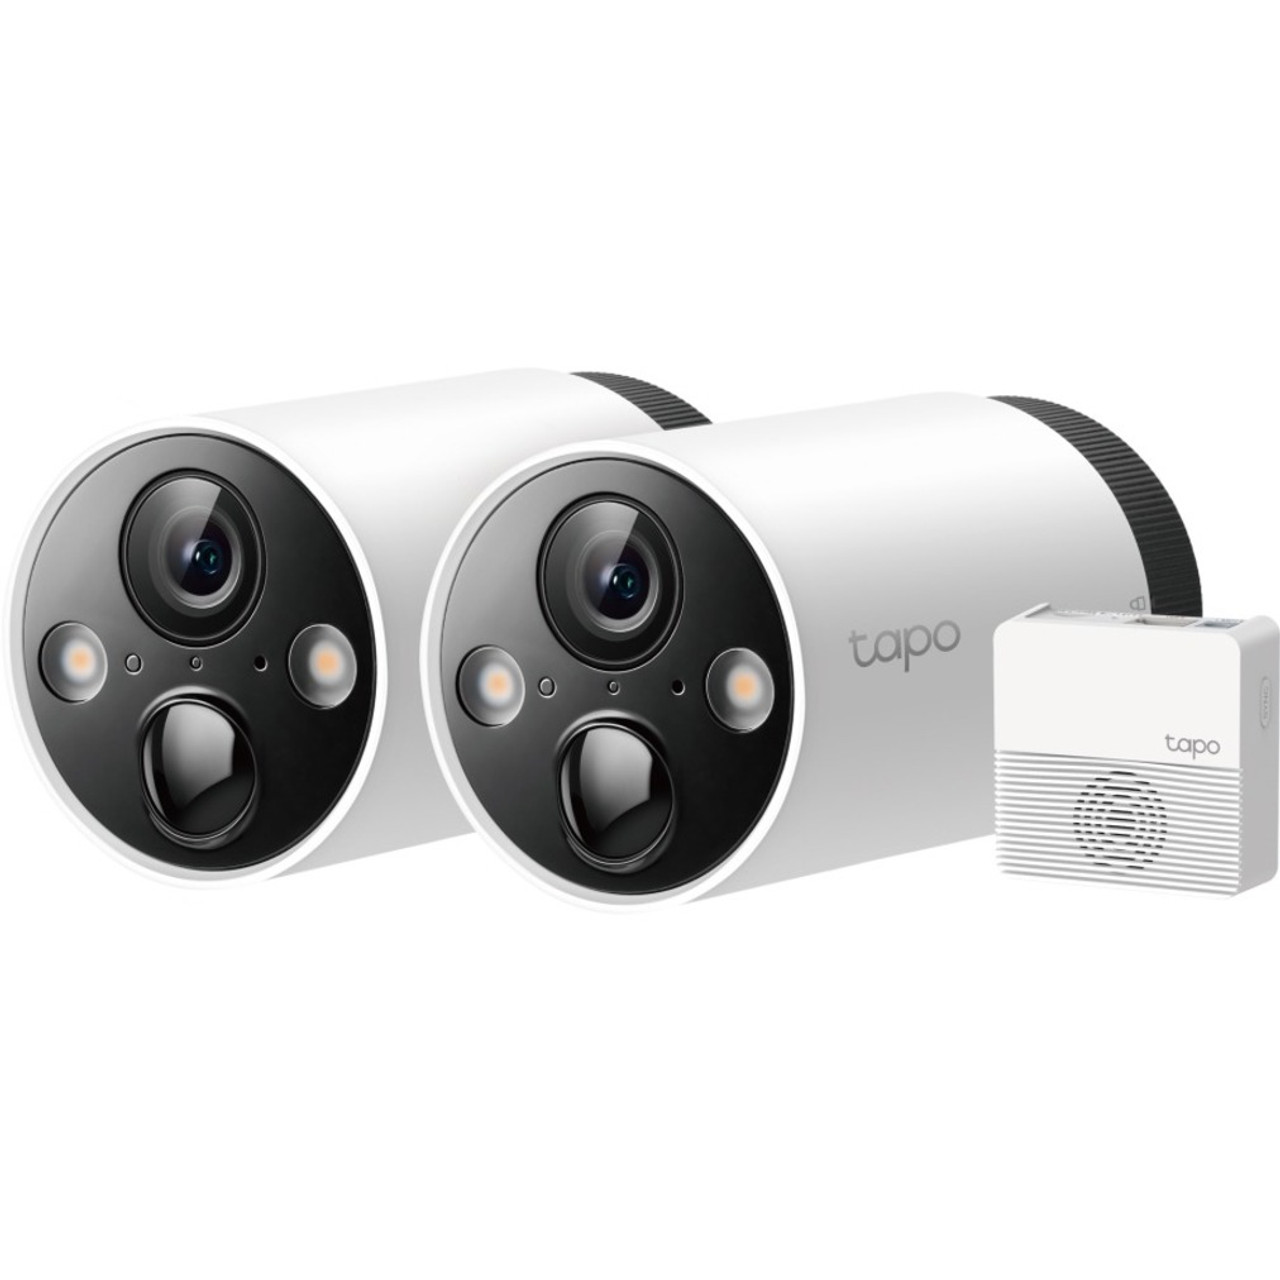 Tapo Smart Wire-Free Security Camera System, 2-Camera System - TAPO C420S2